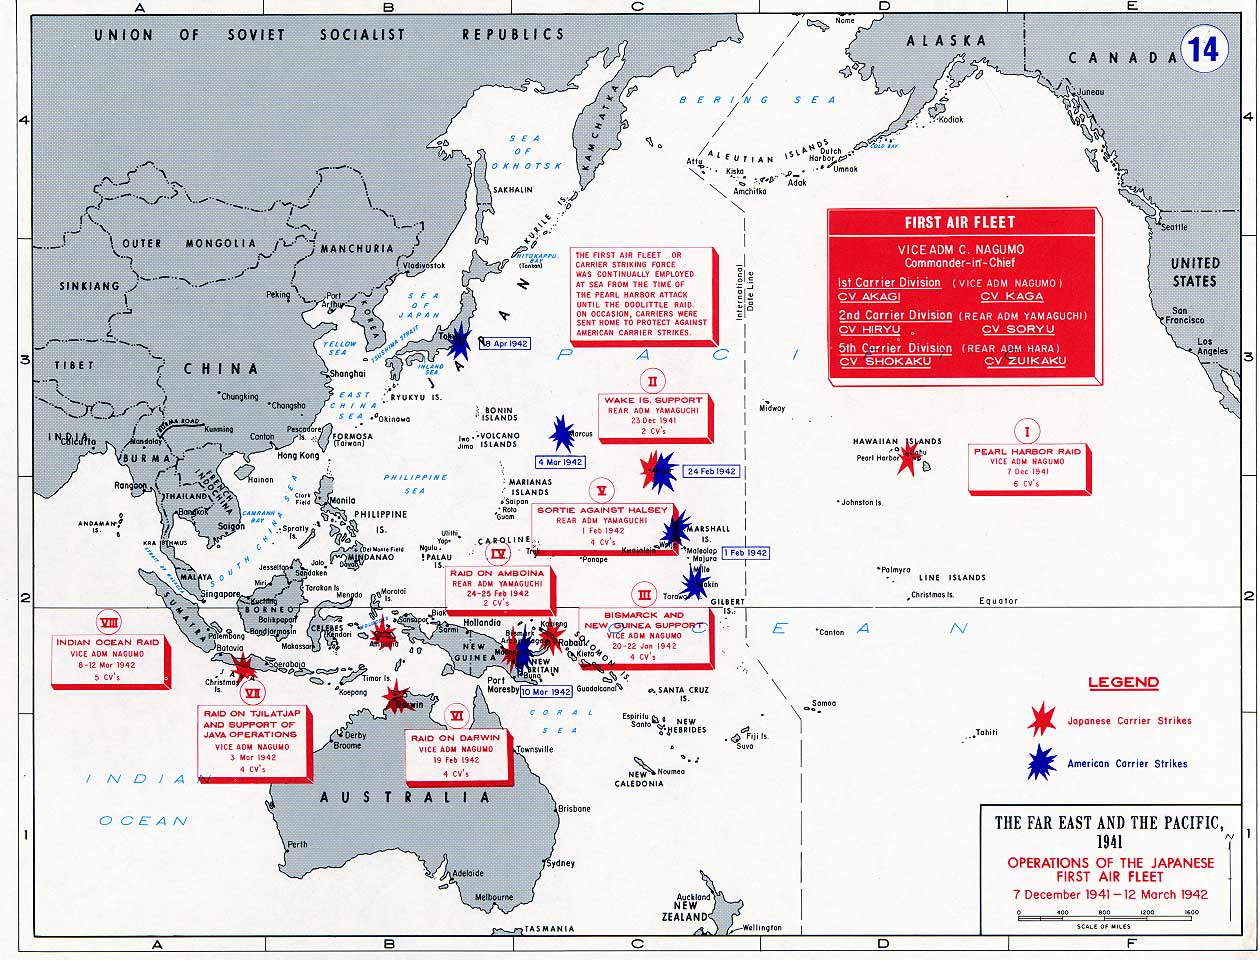 Map noting the operations of the Japanese Navy First Air Fleet/Carrier Striking Force, 7 Dec 1941-12 Mar 1942